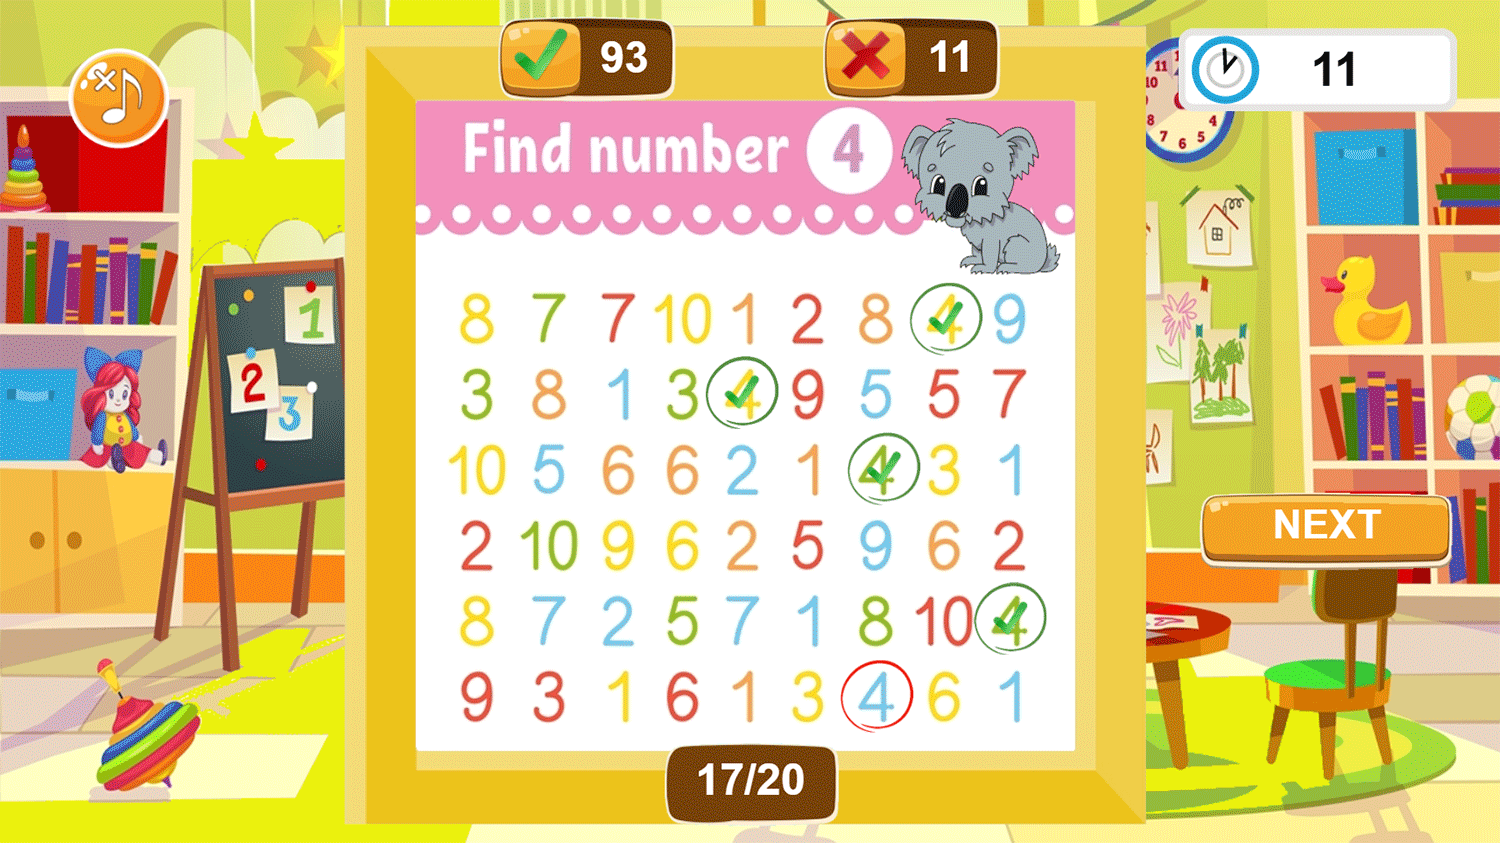 Find The Number Game Screenshots.